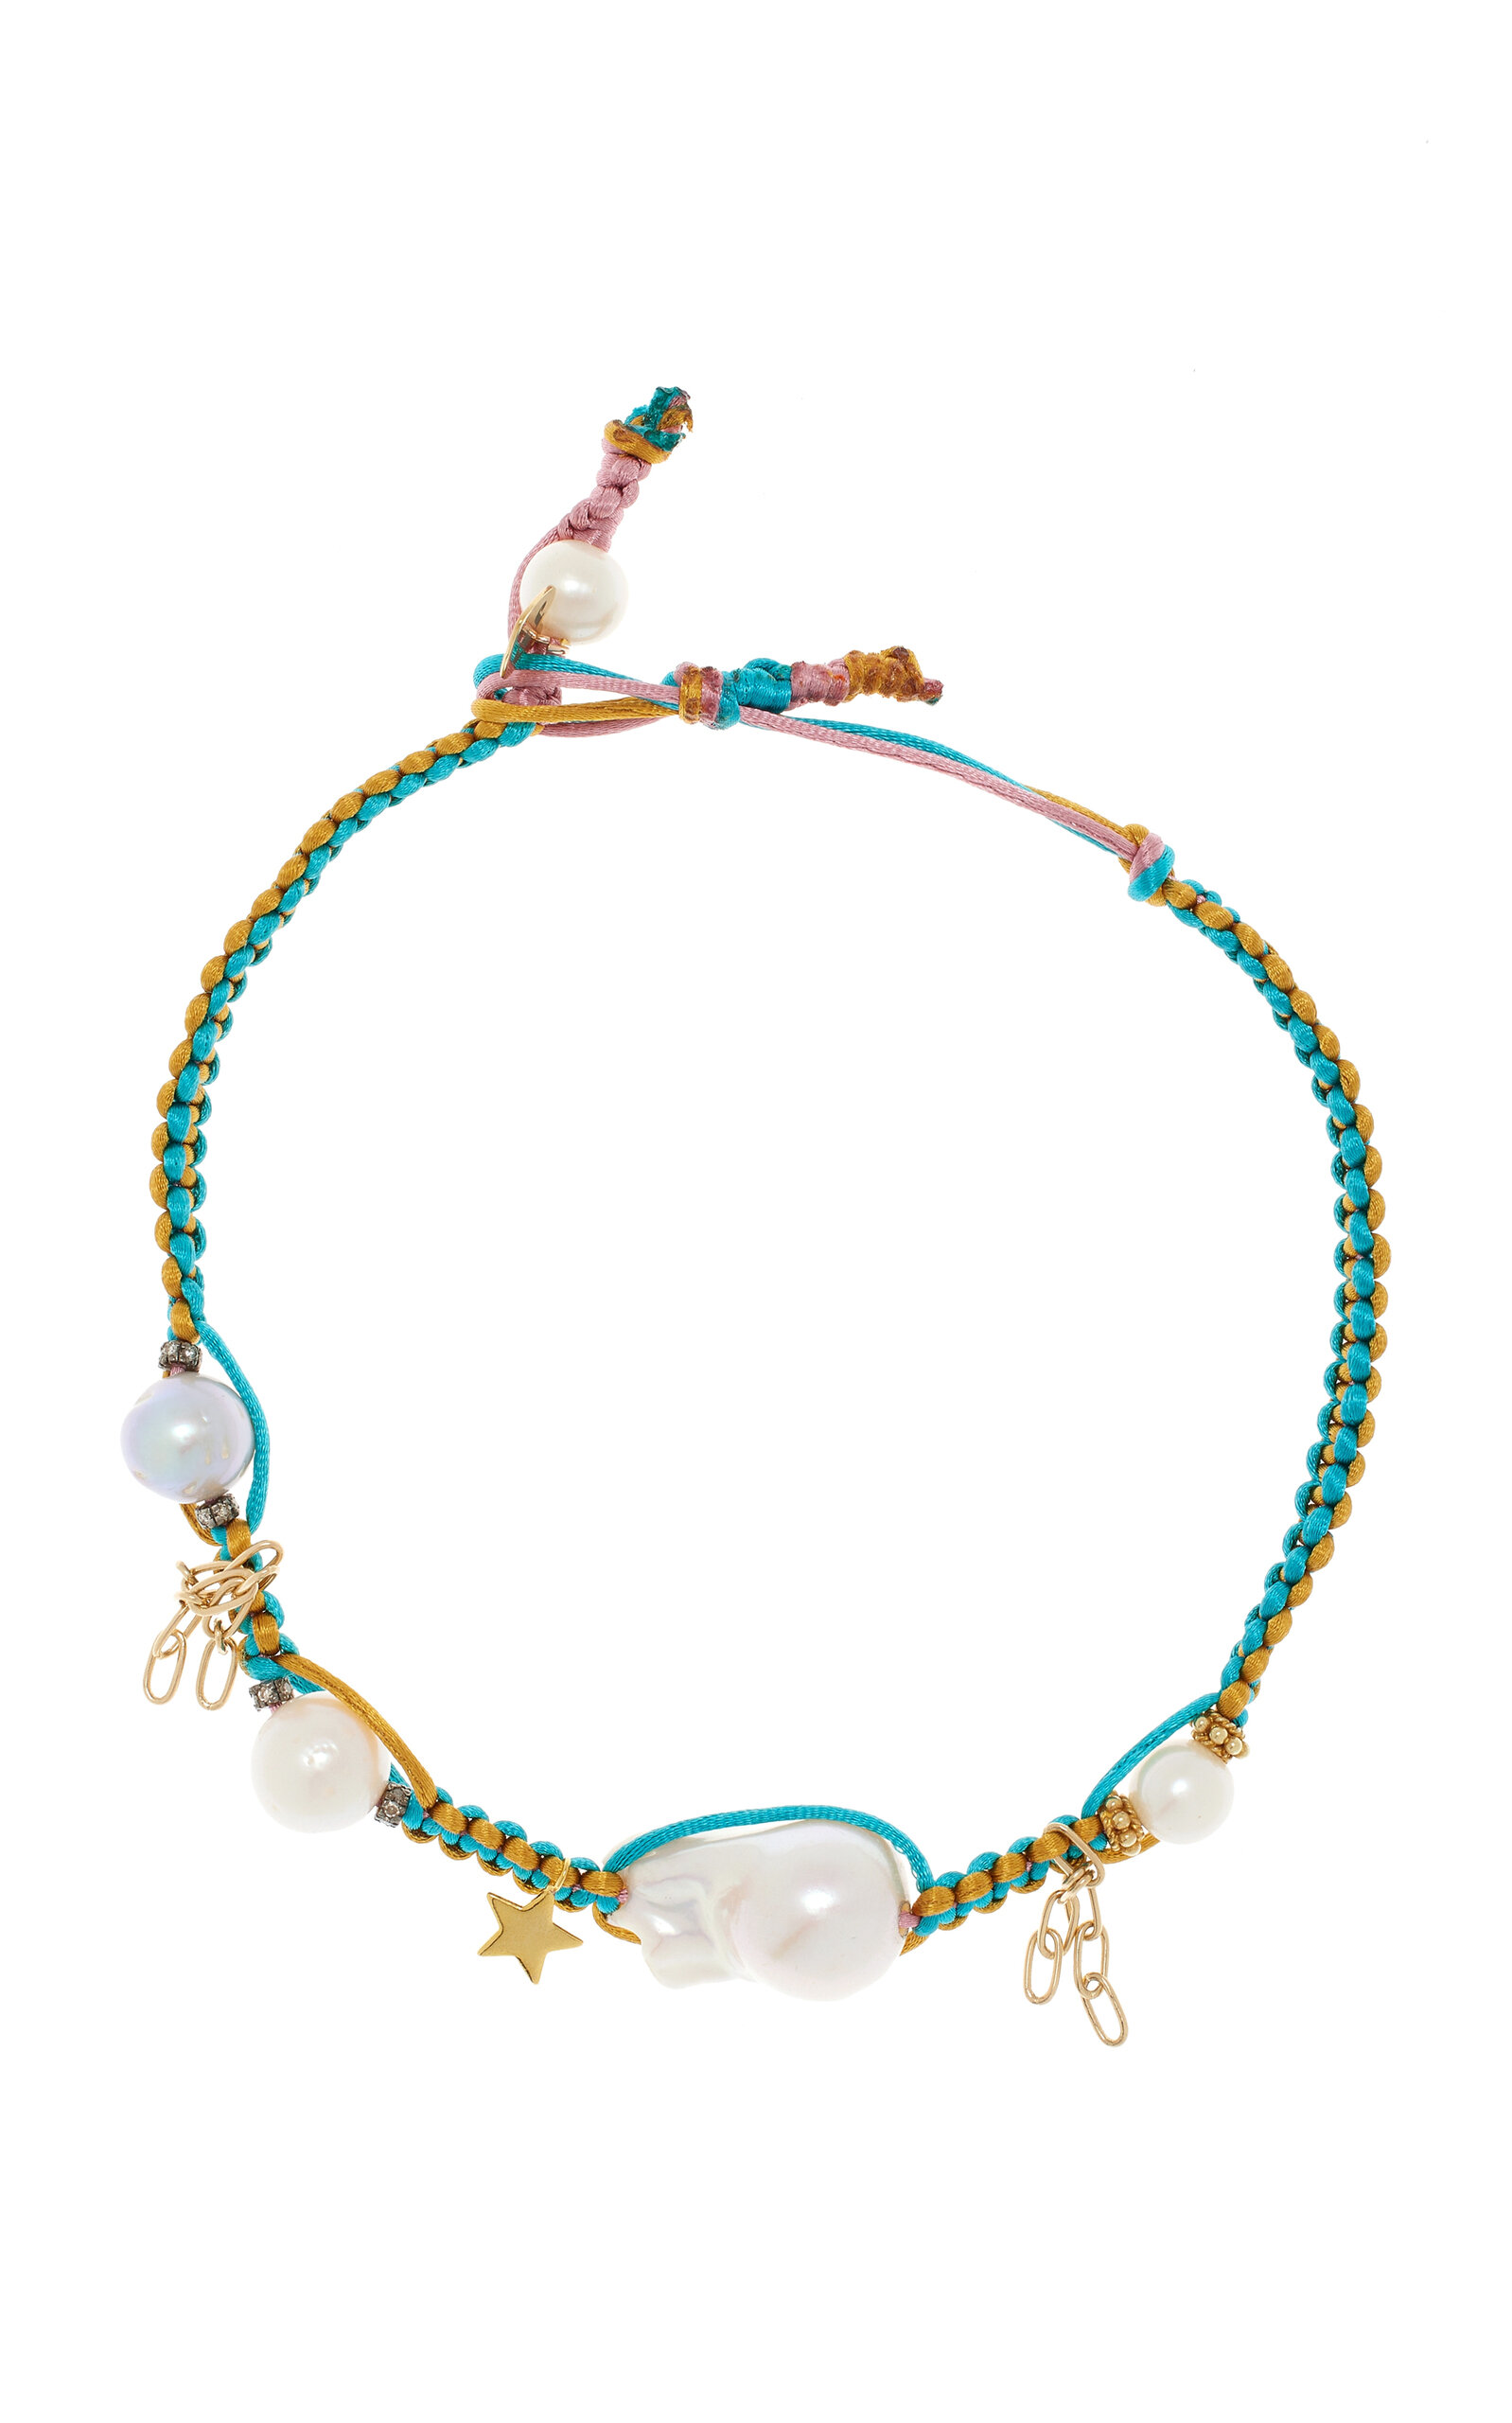 Shop Joie Digiovanni Mexican Dream Knotted Silk Necklace In Multi